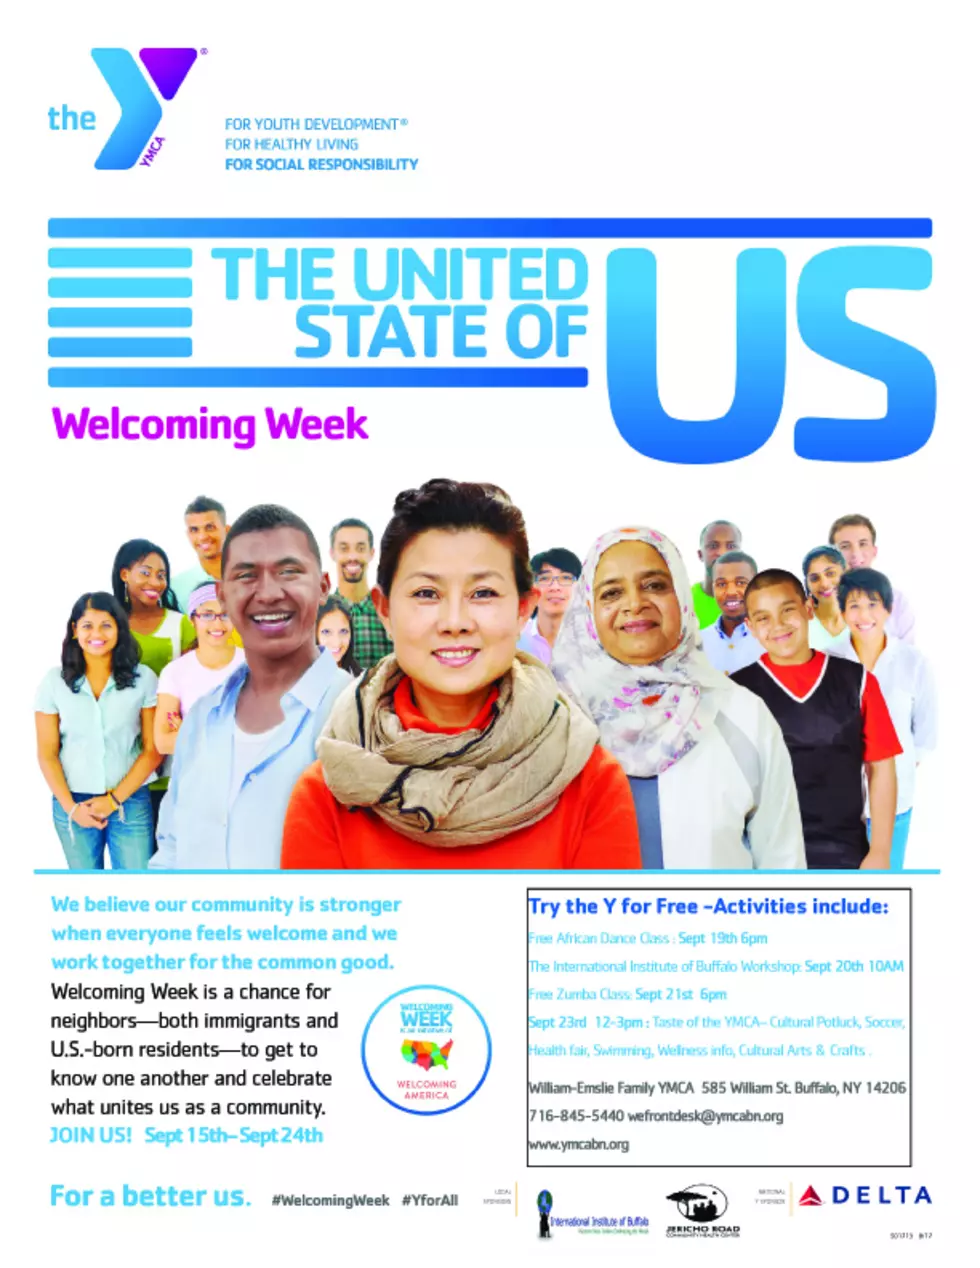 Community: Join the William-Emslie YMCA for &#8216;Welcoming Week&#8217;